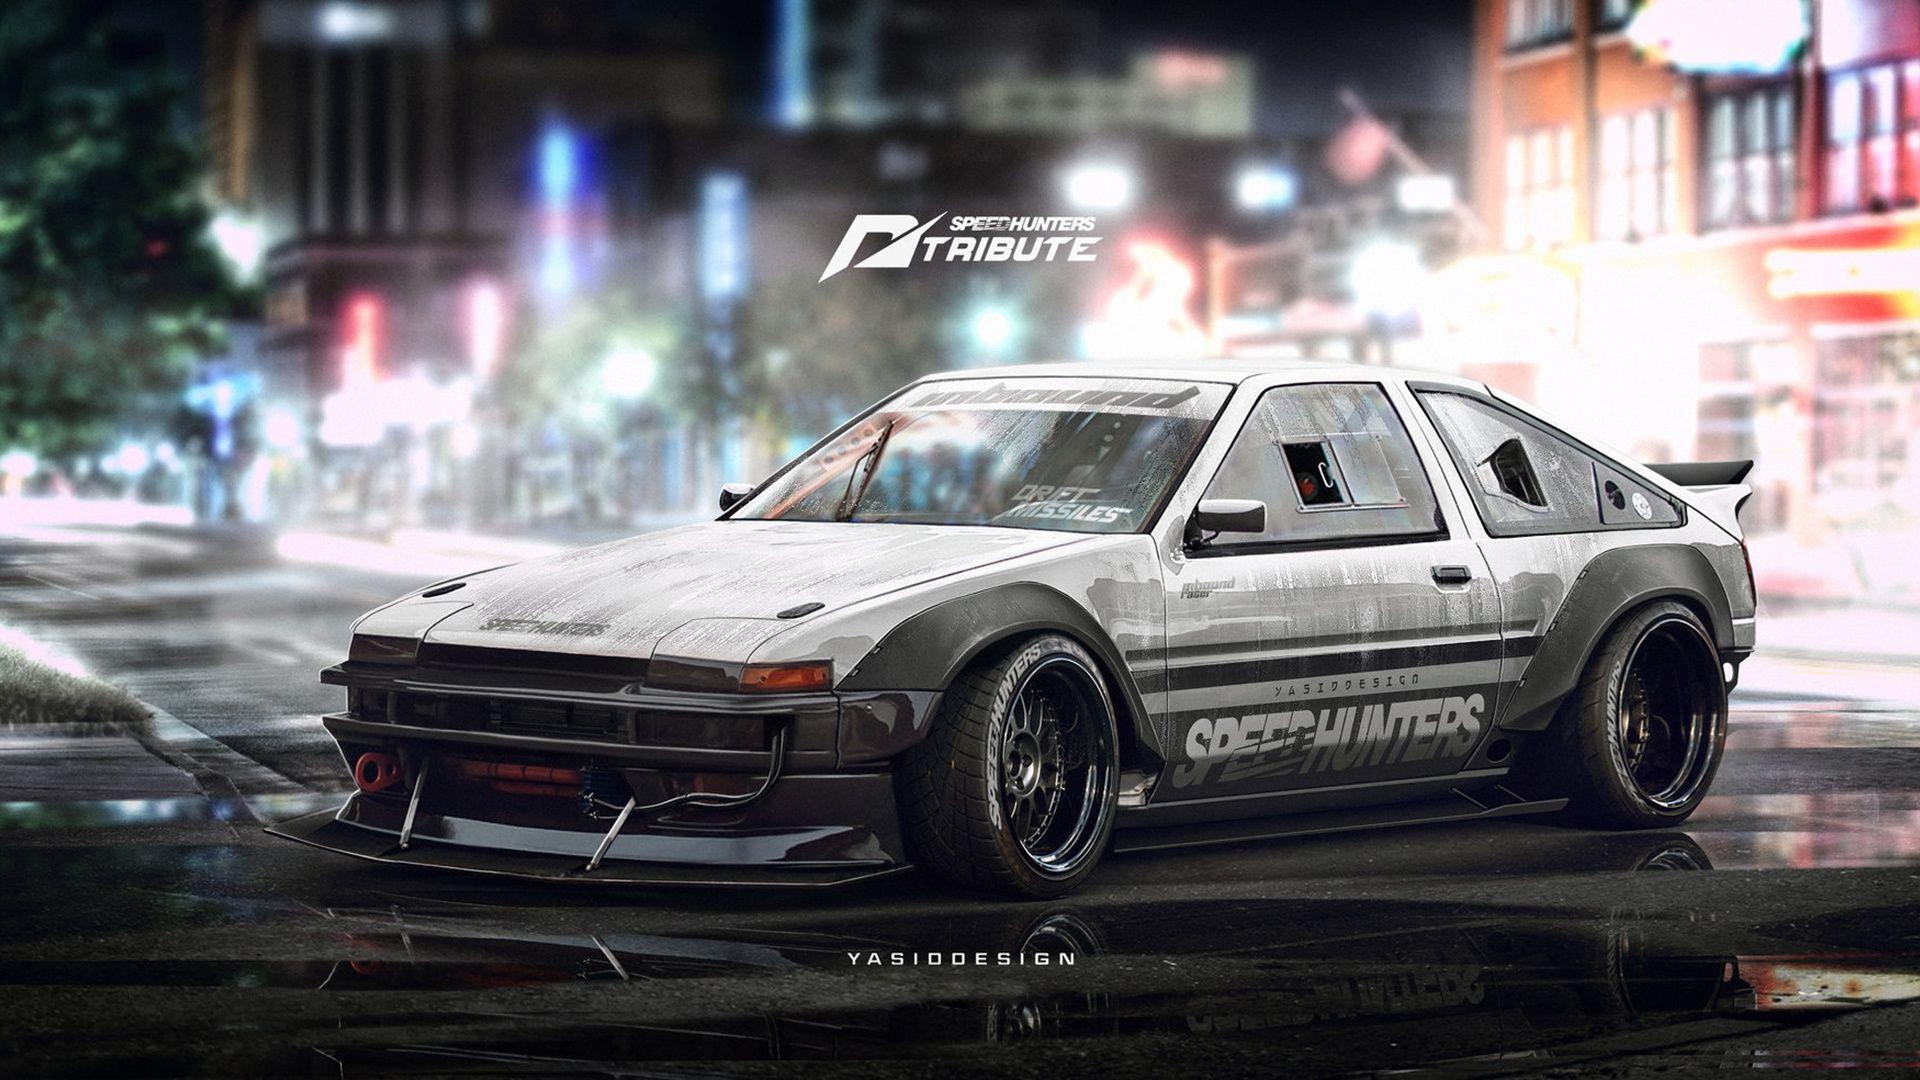 Toyota Ae86 Wallpapers Top Free Toyota Ae86 Backgrounds Wallpaperaccess ...